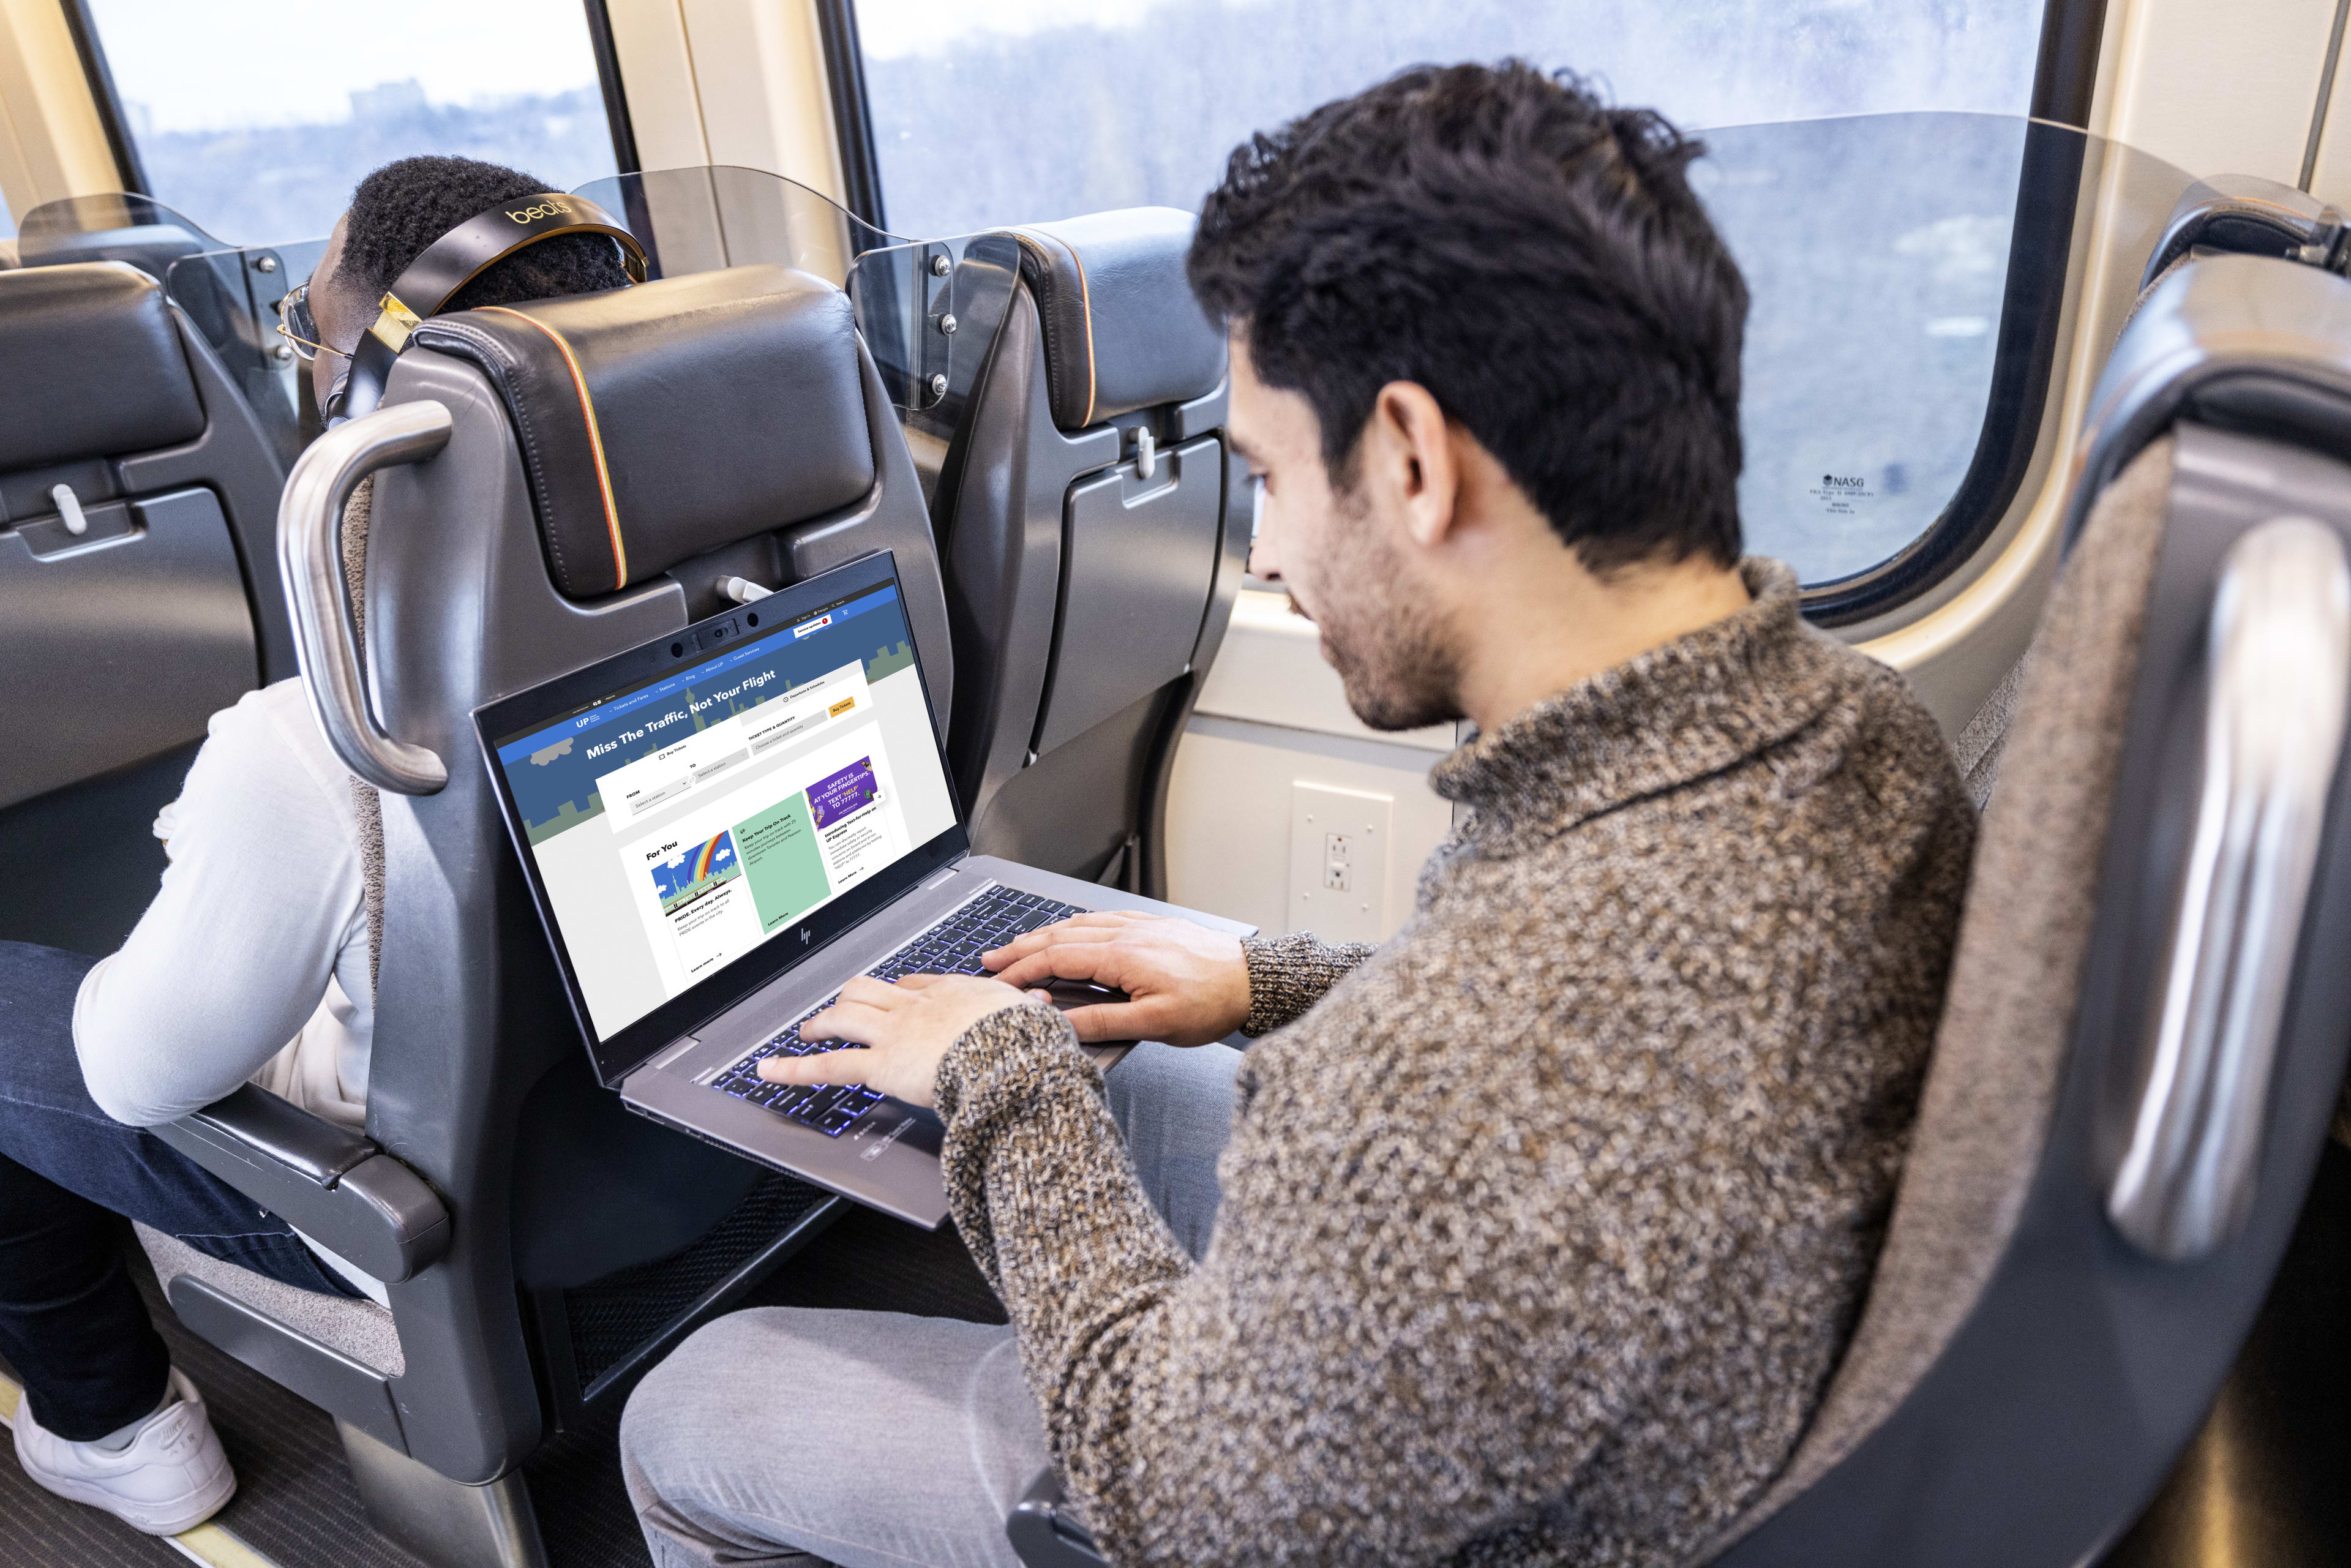 Man sitting onboard train on computer browsing UP website on a laptop